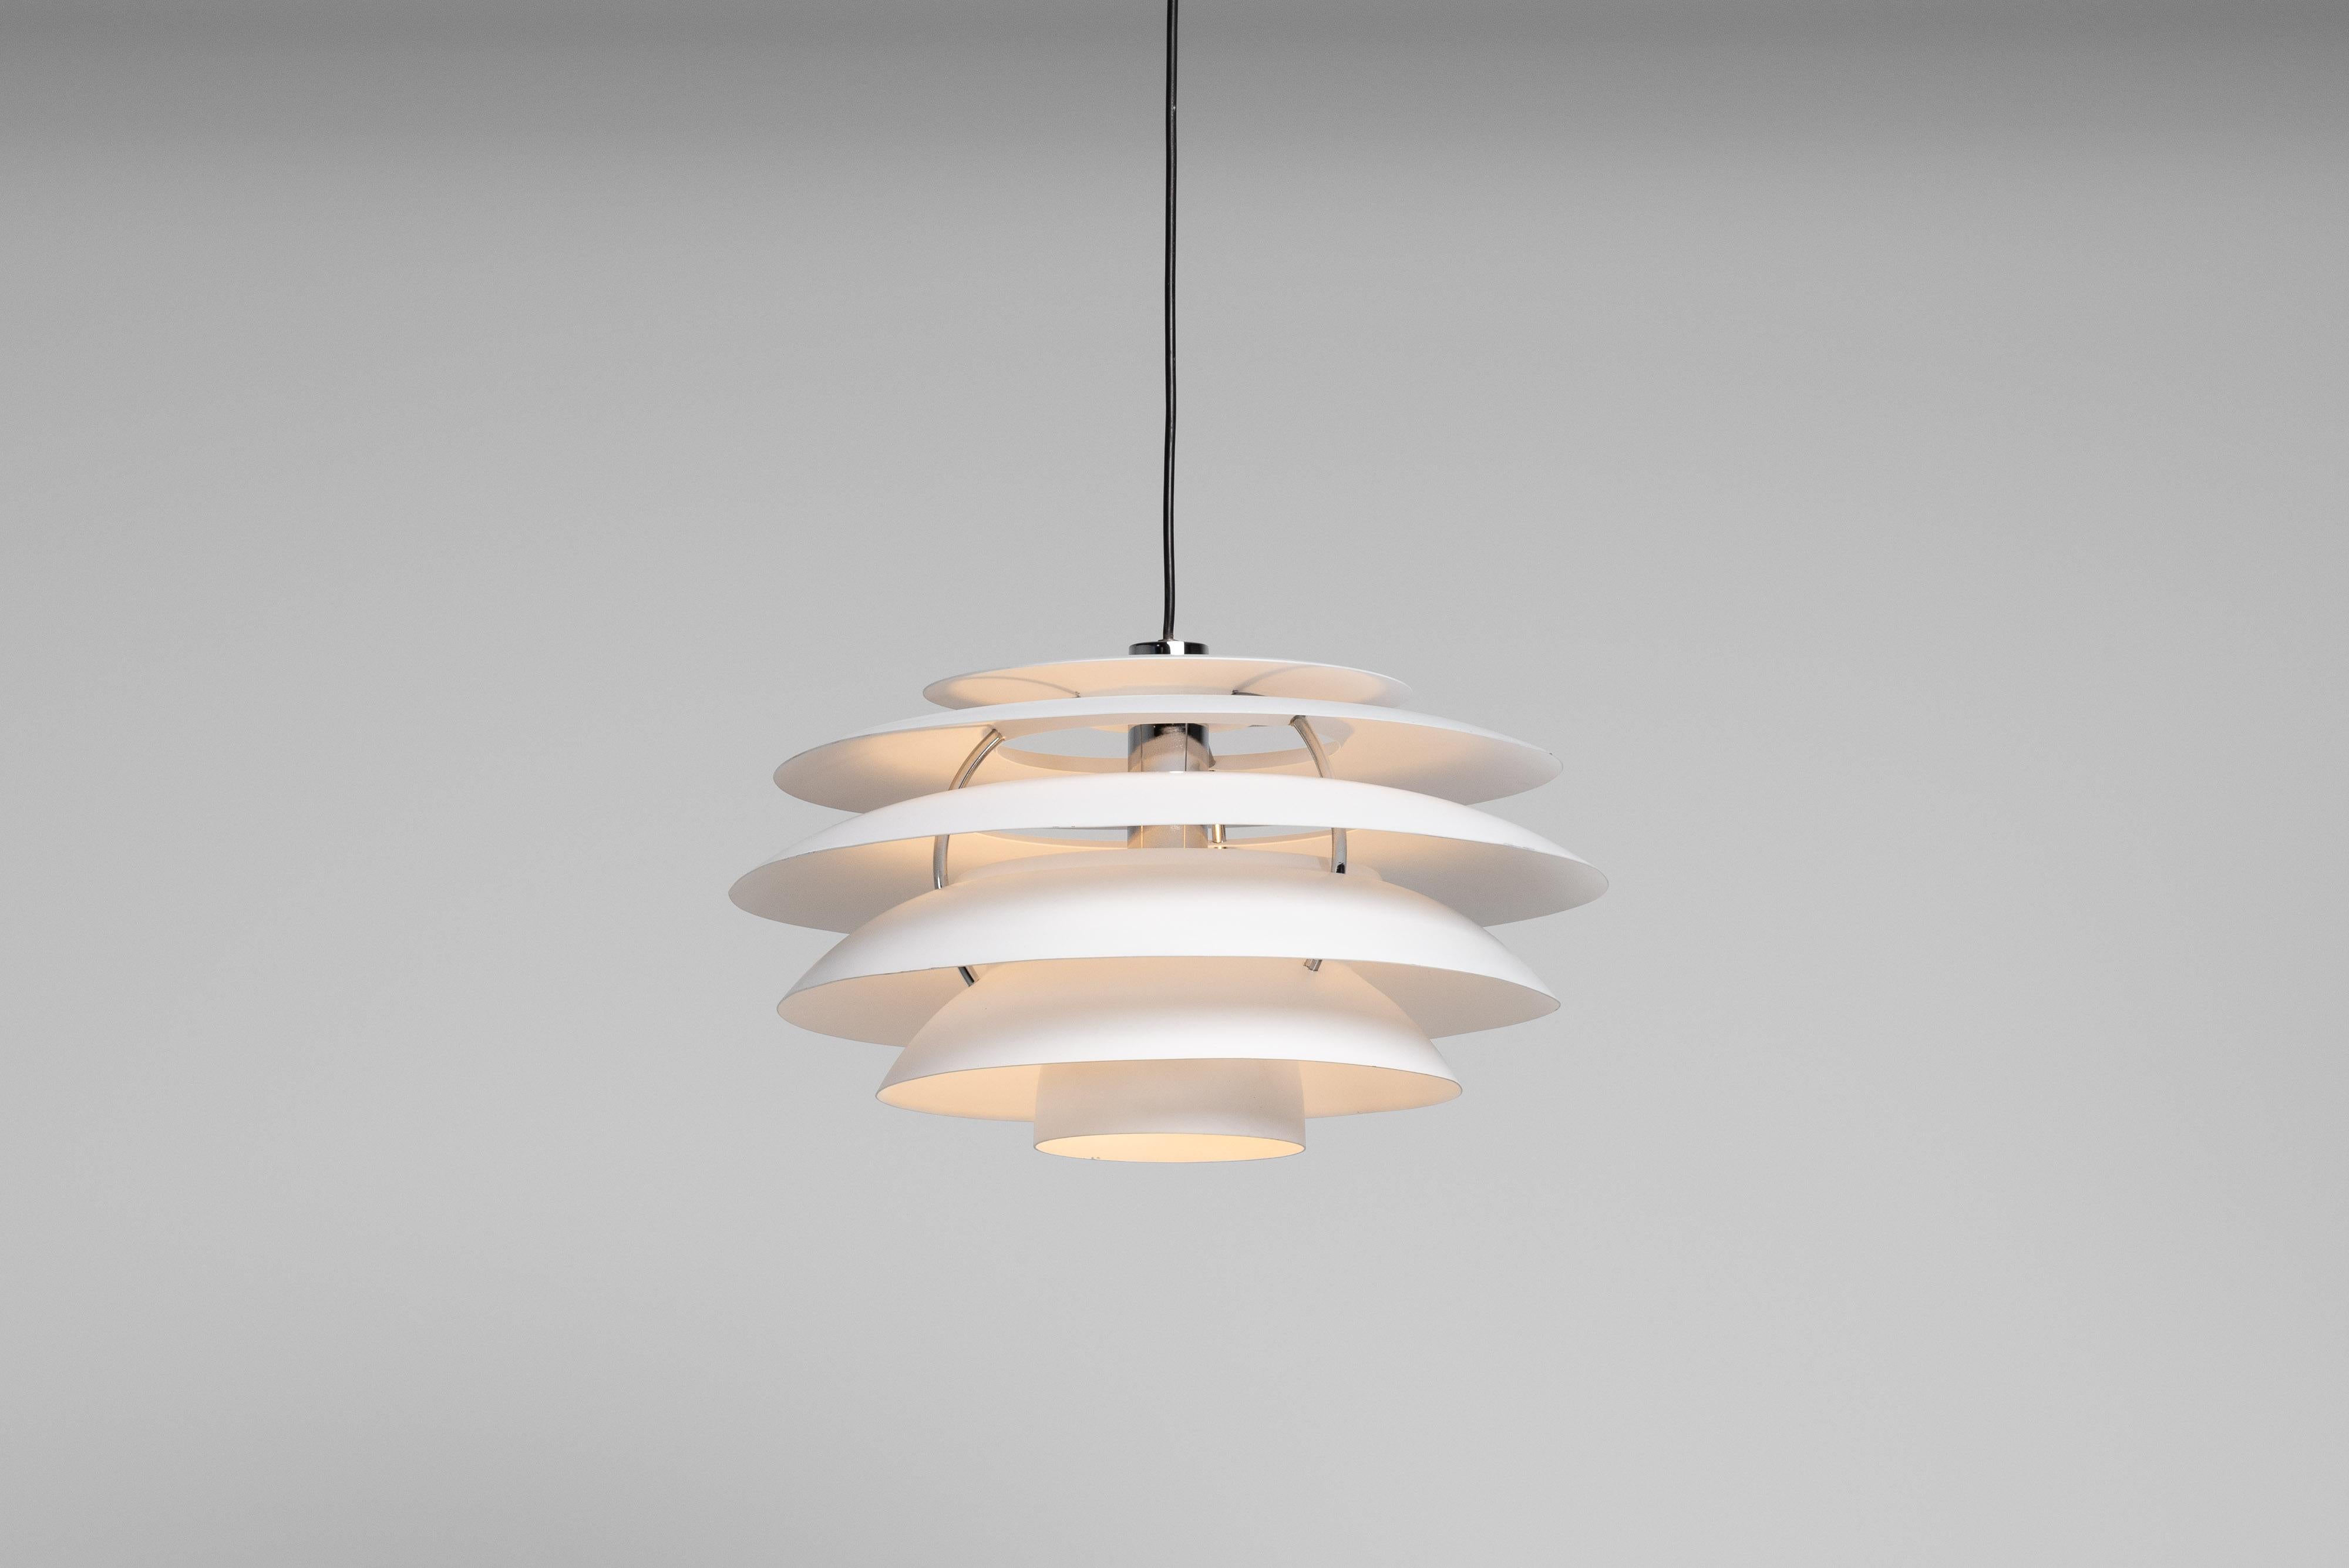 Very nice chandelier model 1262 designed and manufactured by Stilnovo, Italy 1960. This chandelier is not only aesthetically pleasing but also the perfect size for a variety of settings. This piece draws inspiration from the famous Louis Poulsen PH